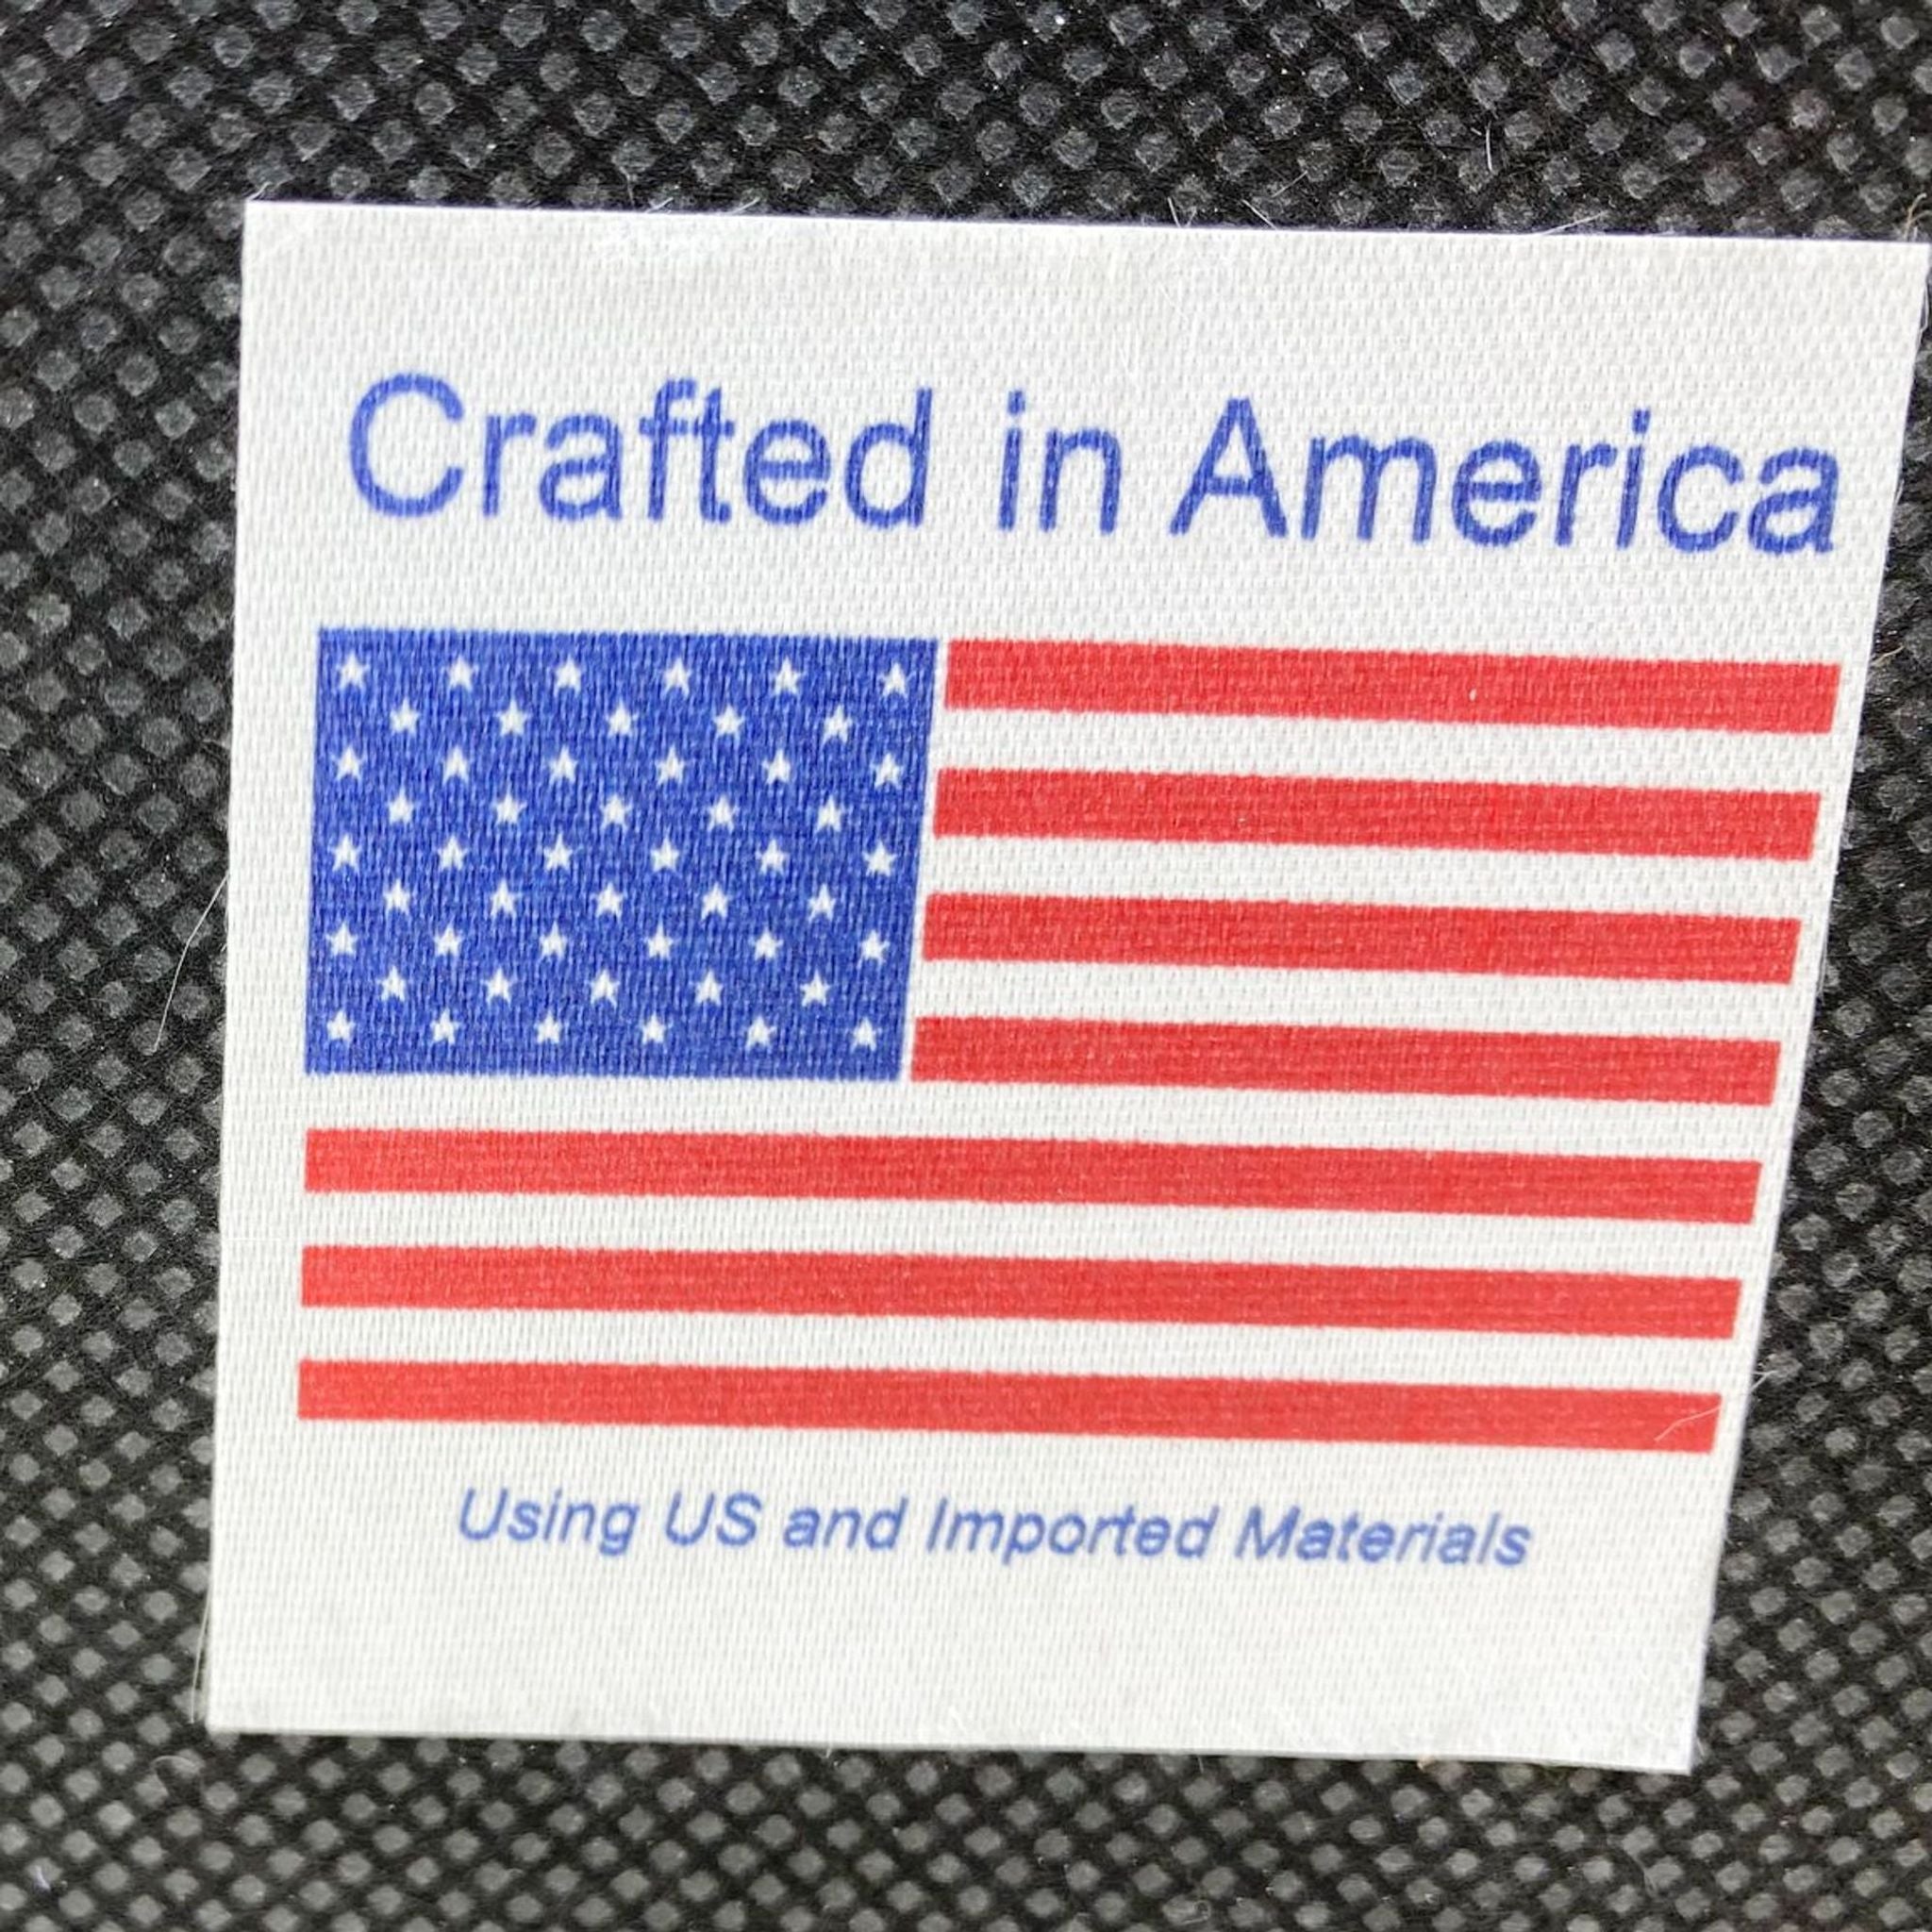 2. Label stating "Crafted in America Using US and Imported Materials" above an American flag.